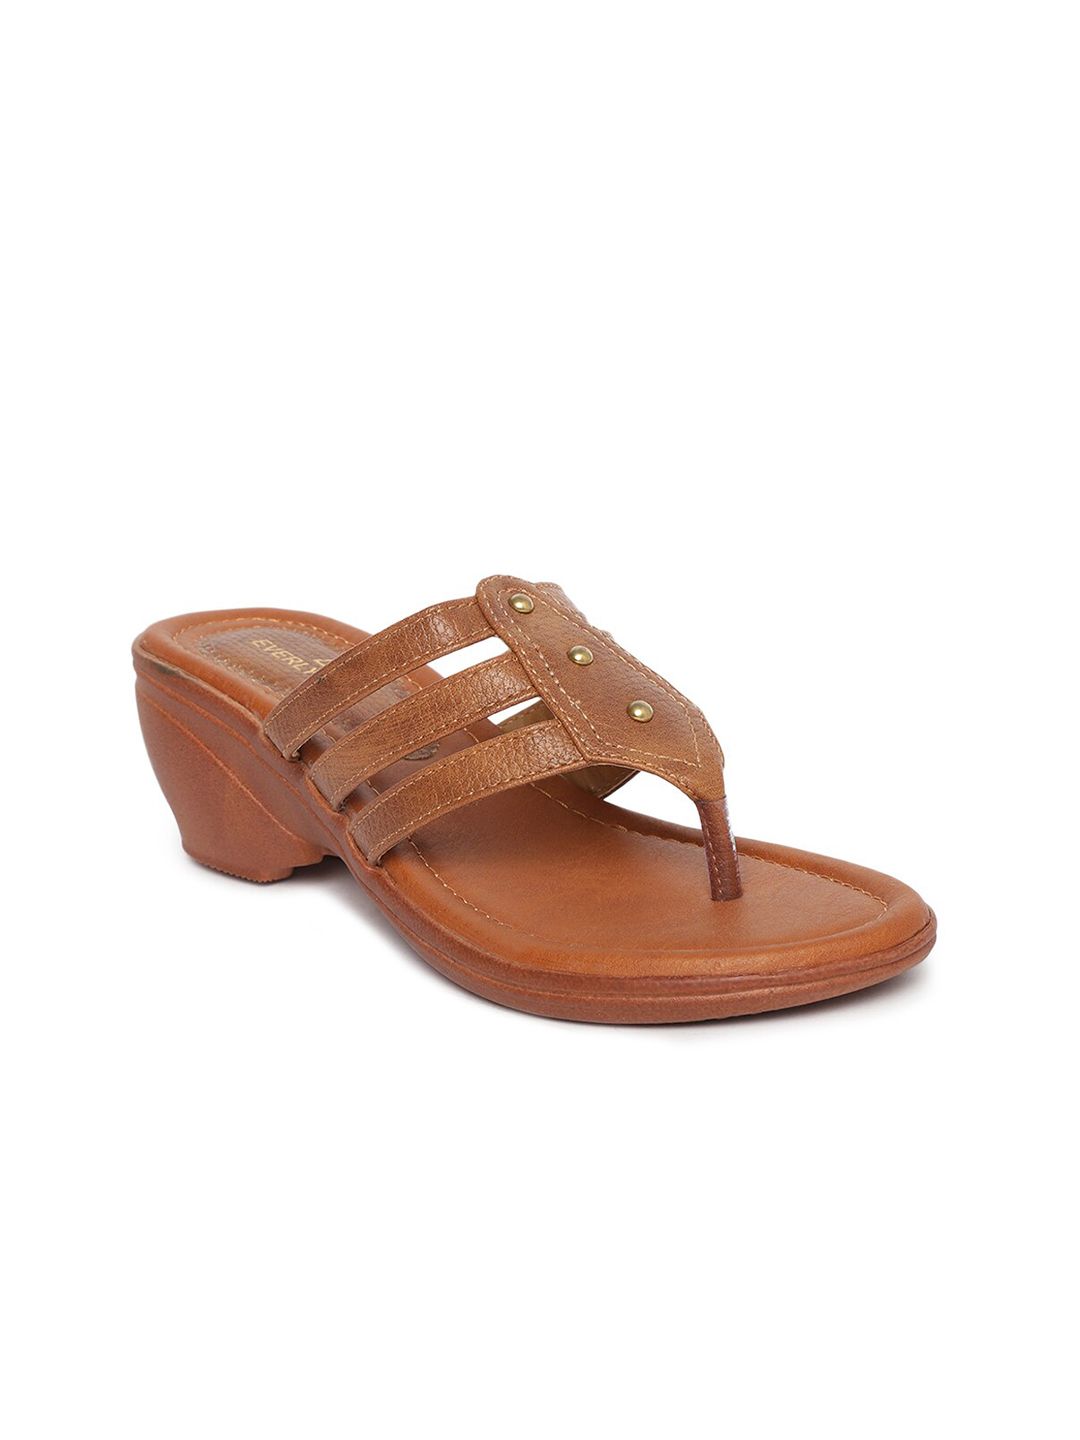 EVERLY Tan Brown Wedge Heels Price in India